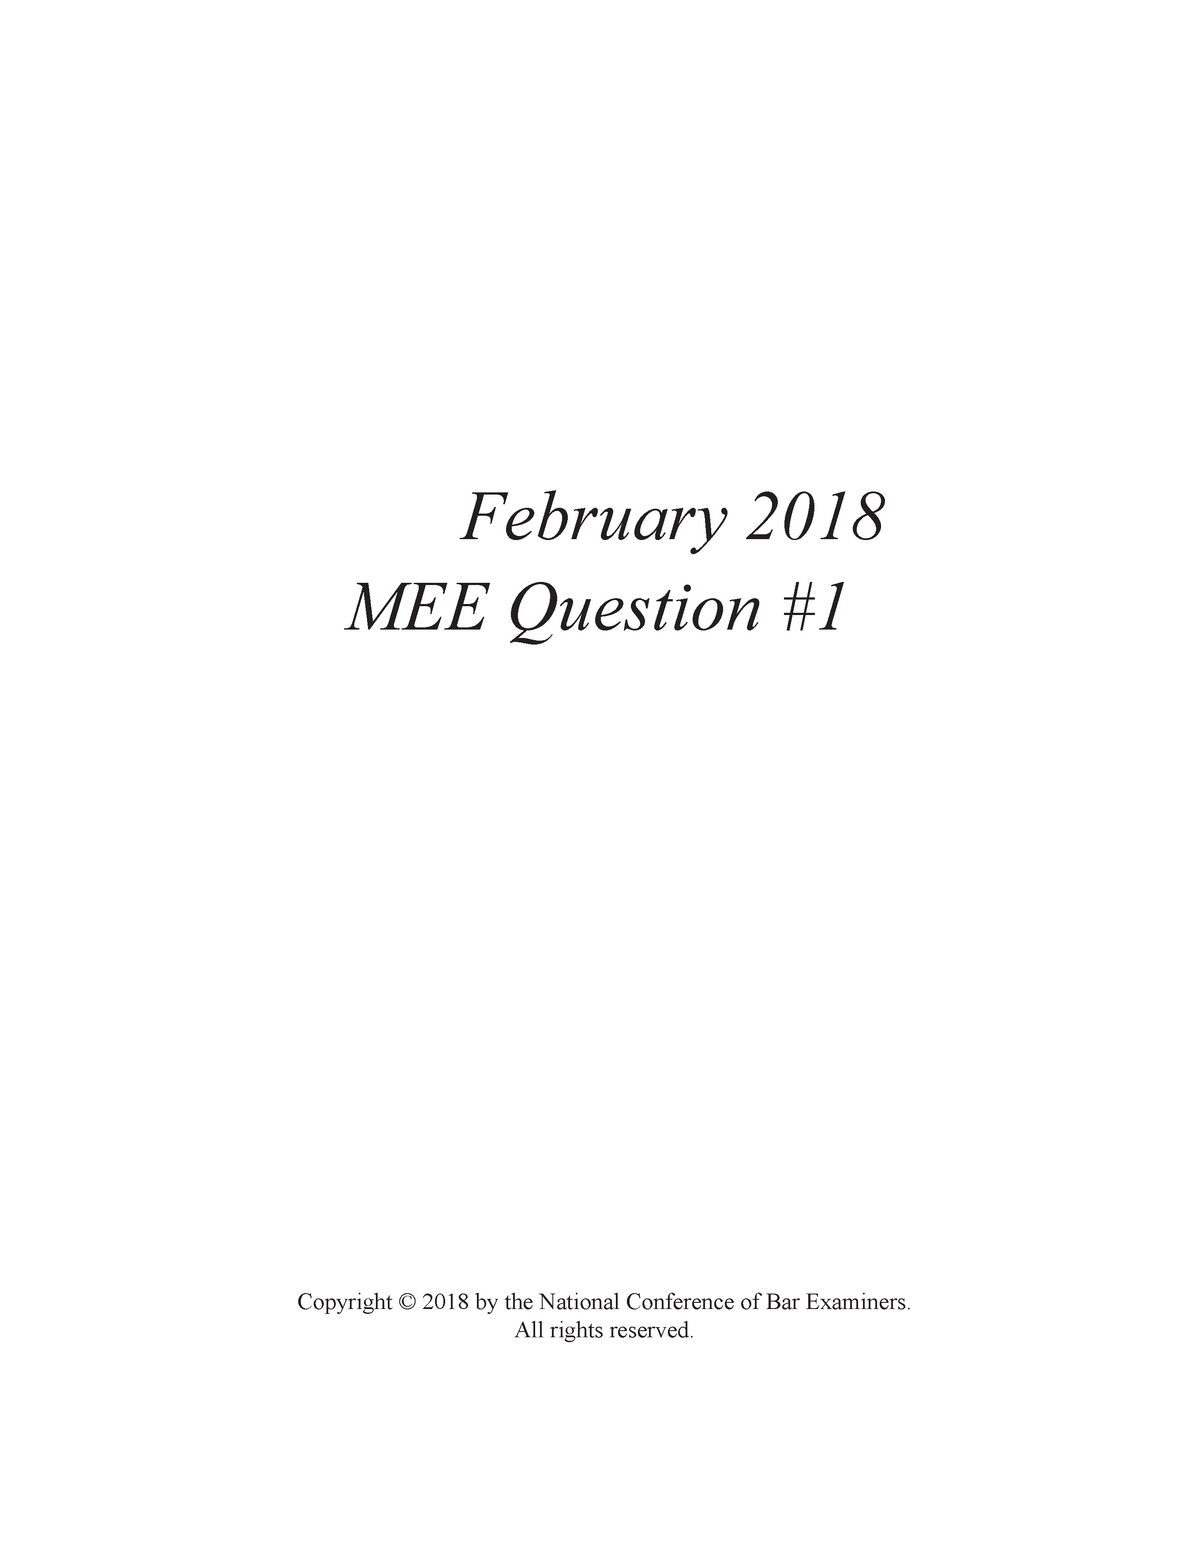 Feb 2018 MEE Full Download February 2018 MEE Question Copyright